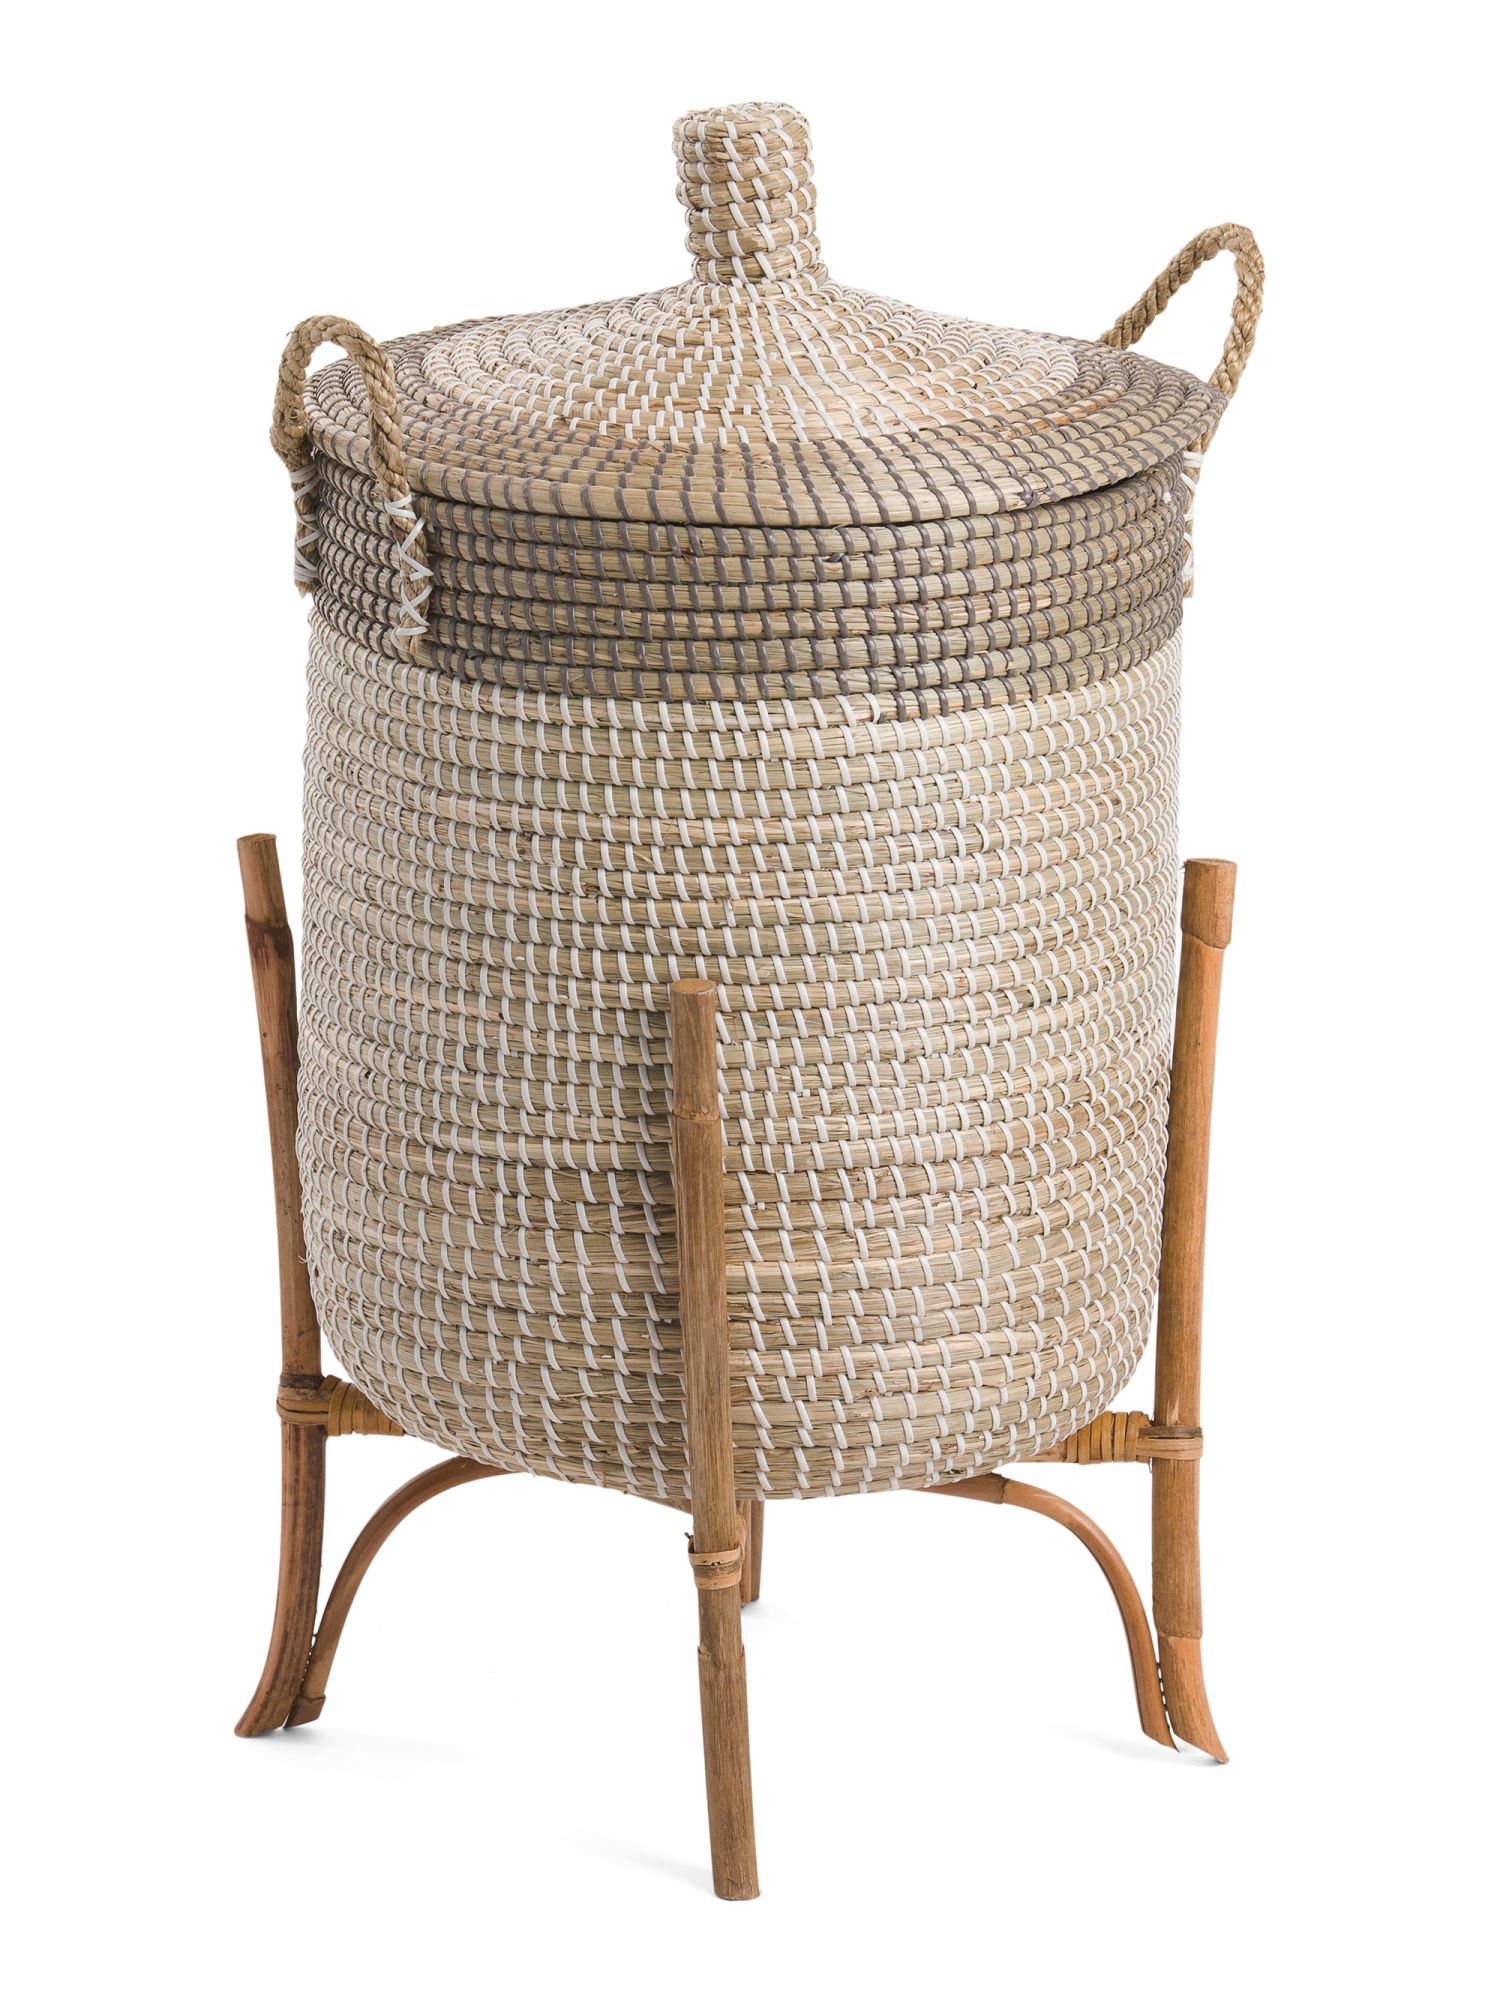 Medium Seagrass Hamper With Trim | Mother's Day Gifts | Marshalls | Marshalls